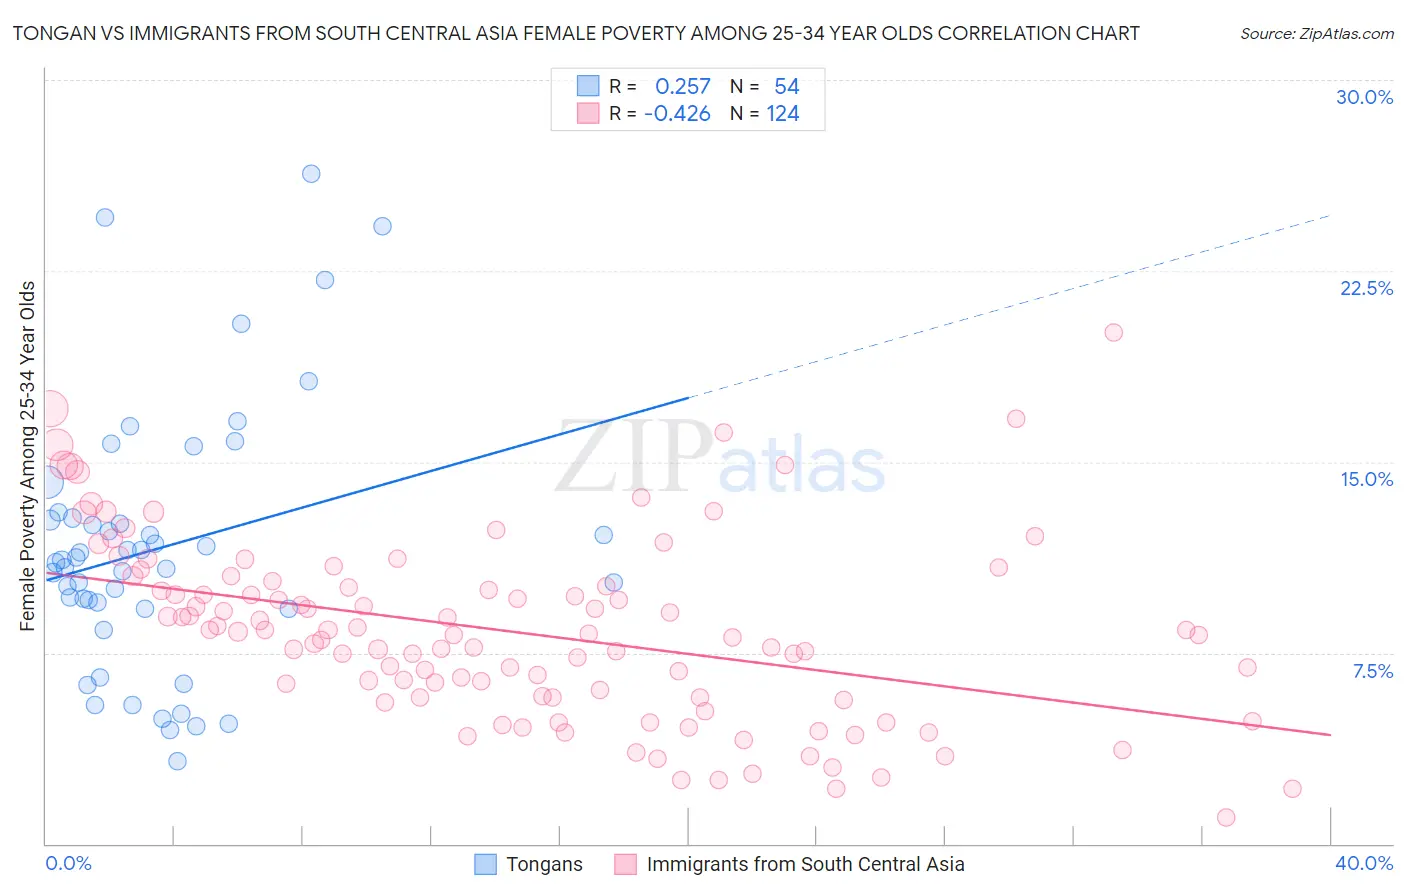 Tongan vs Immigrants from South Central Asia Female Poverty Among 25-34 Year Olds